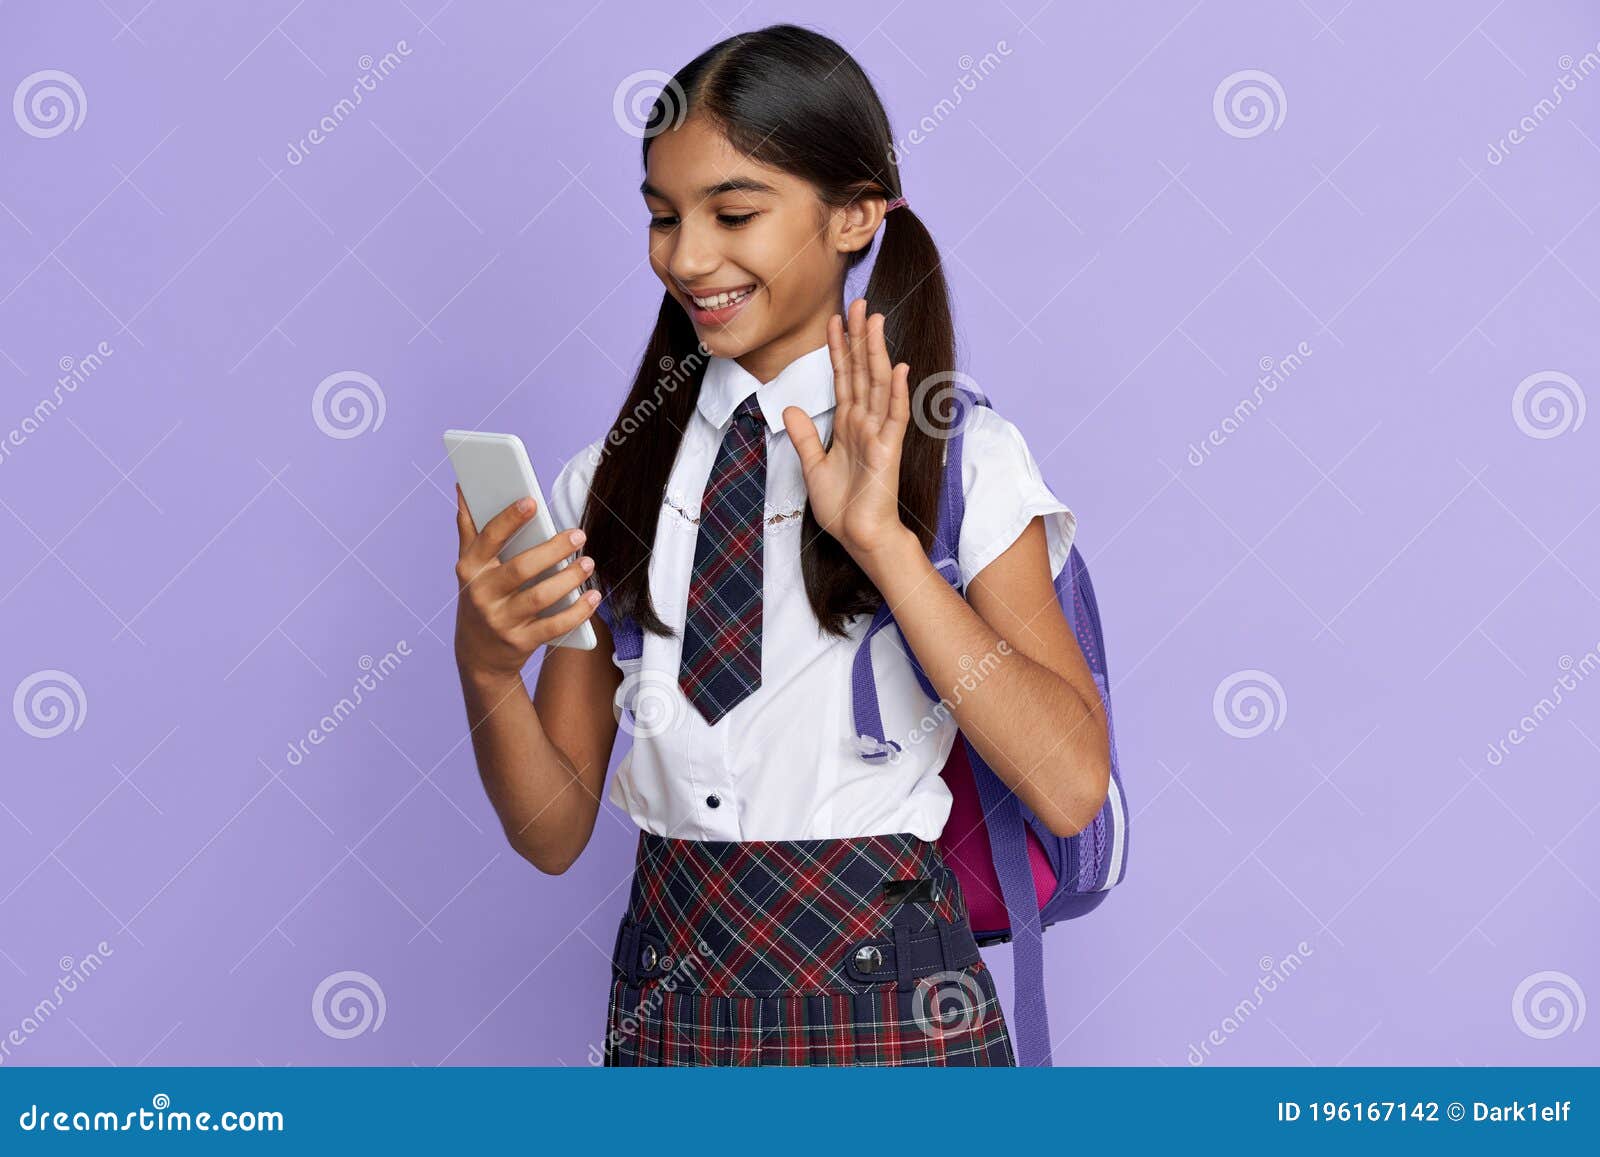 Xxxsex Usa School Girls Video - Smiling Indian School Girl Video Calling on Mobile Phone Isolated on  Background. Stock Photo - Image of learn, cellphone: 196167142